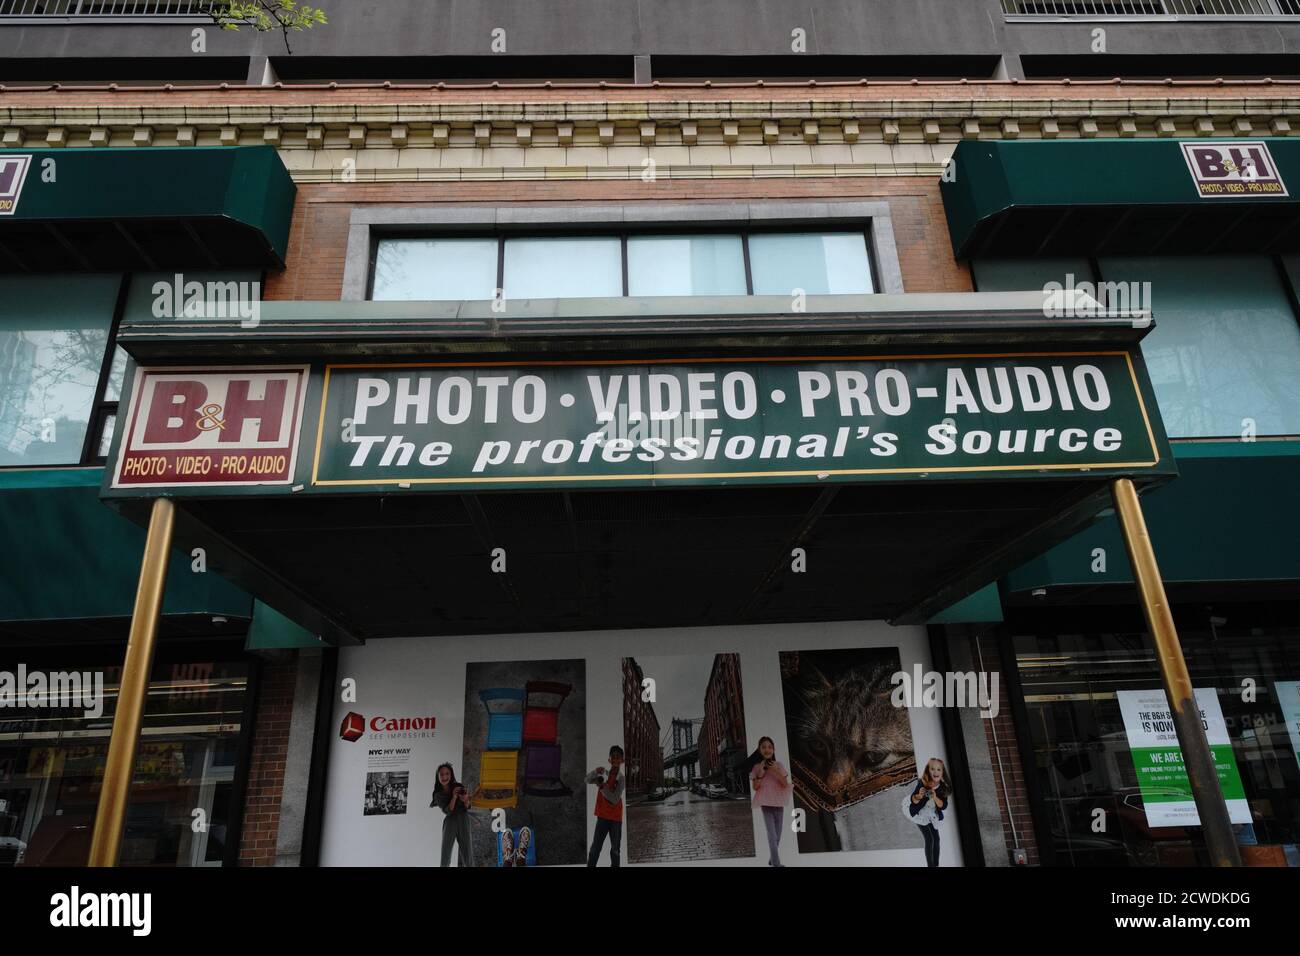 B&H Photo Video Store sign in New York Stock Photo - Alamy